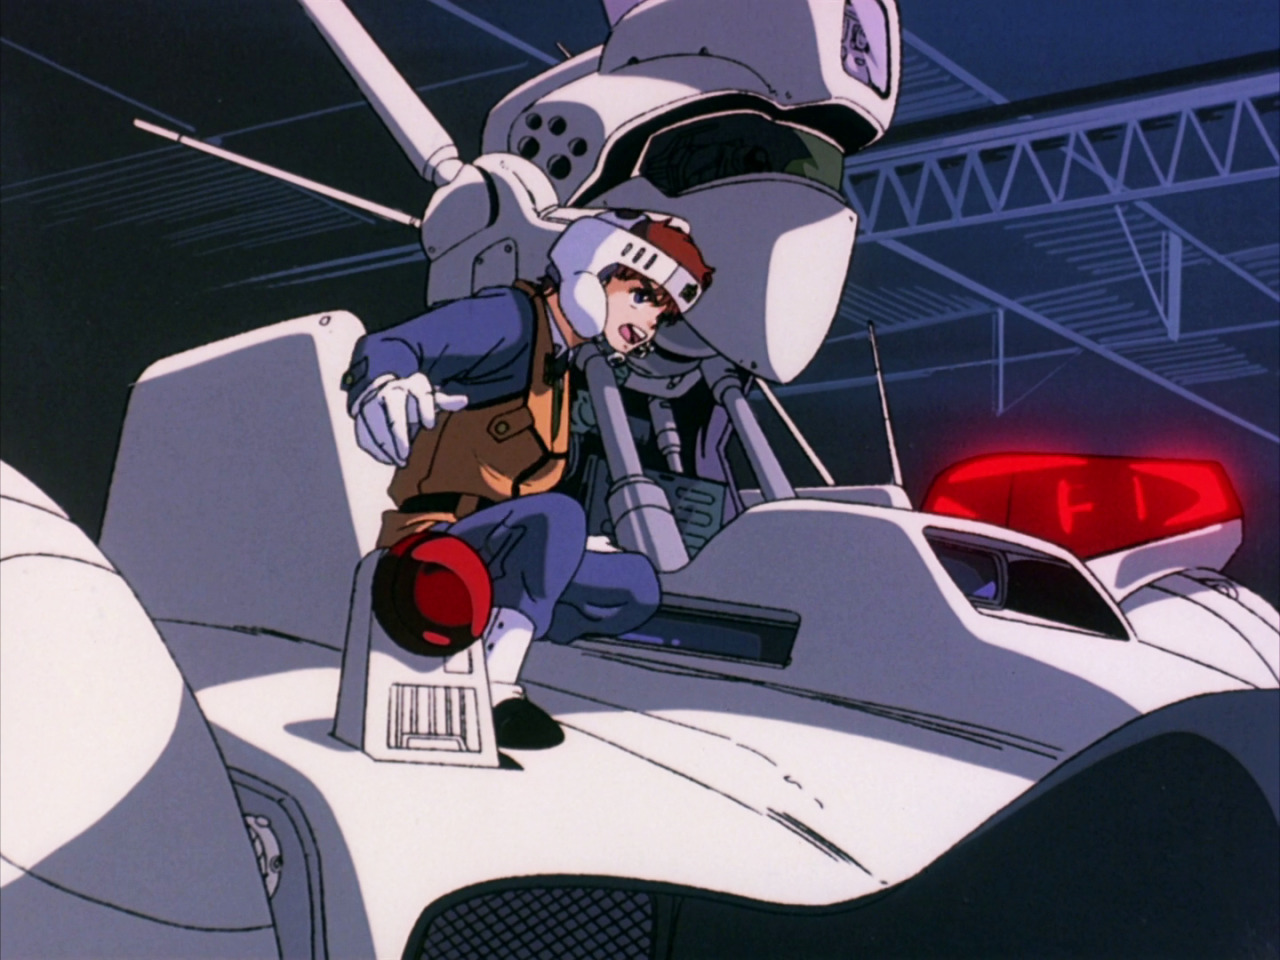 80sanime:  1979-1990 Anime PrimerPatlabor: The Early Days (1988)In the 90s, the dream